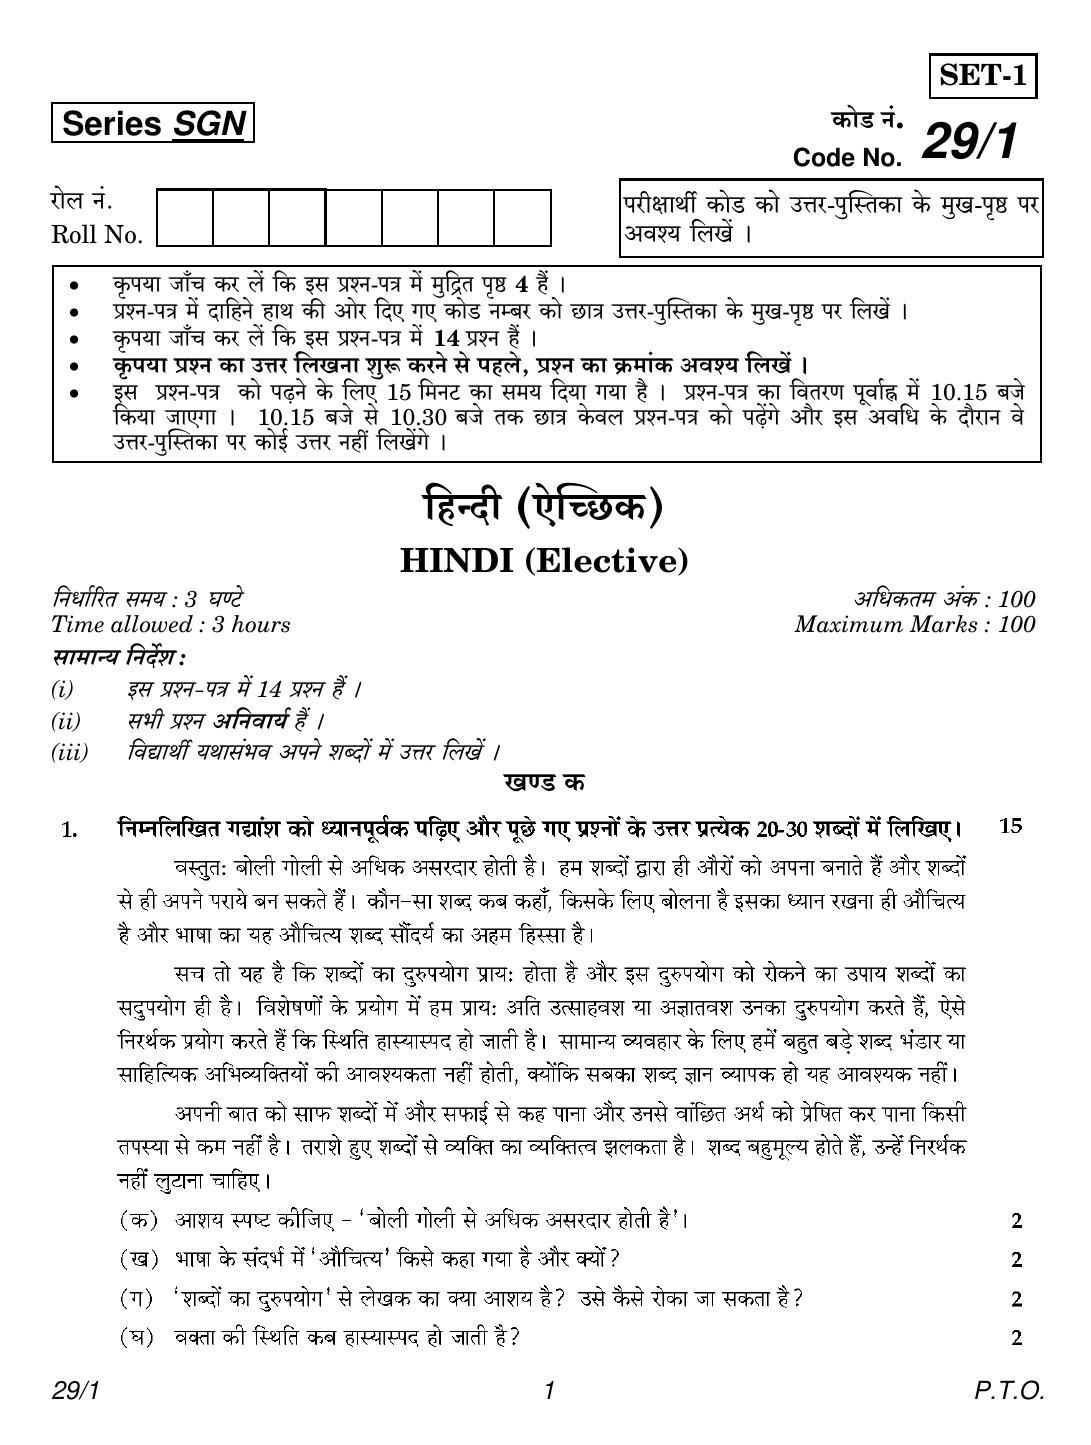 CBSE Class 12 29-1 Hindi Elective 2018 Question Paper - Page 1